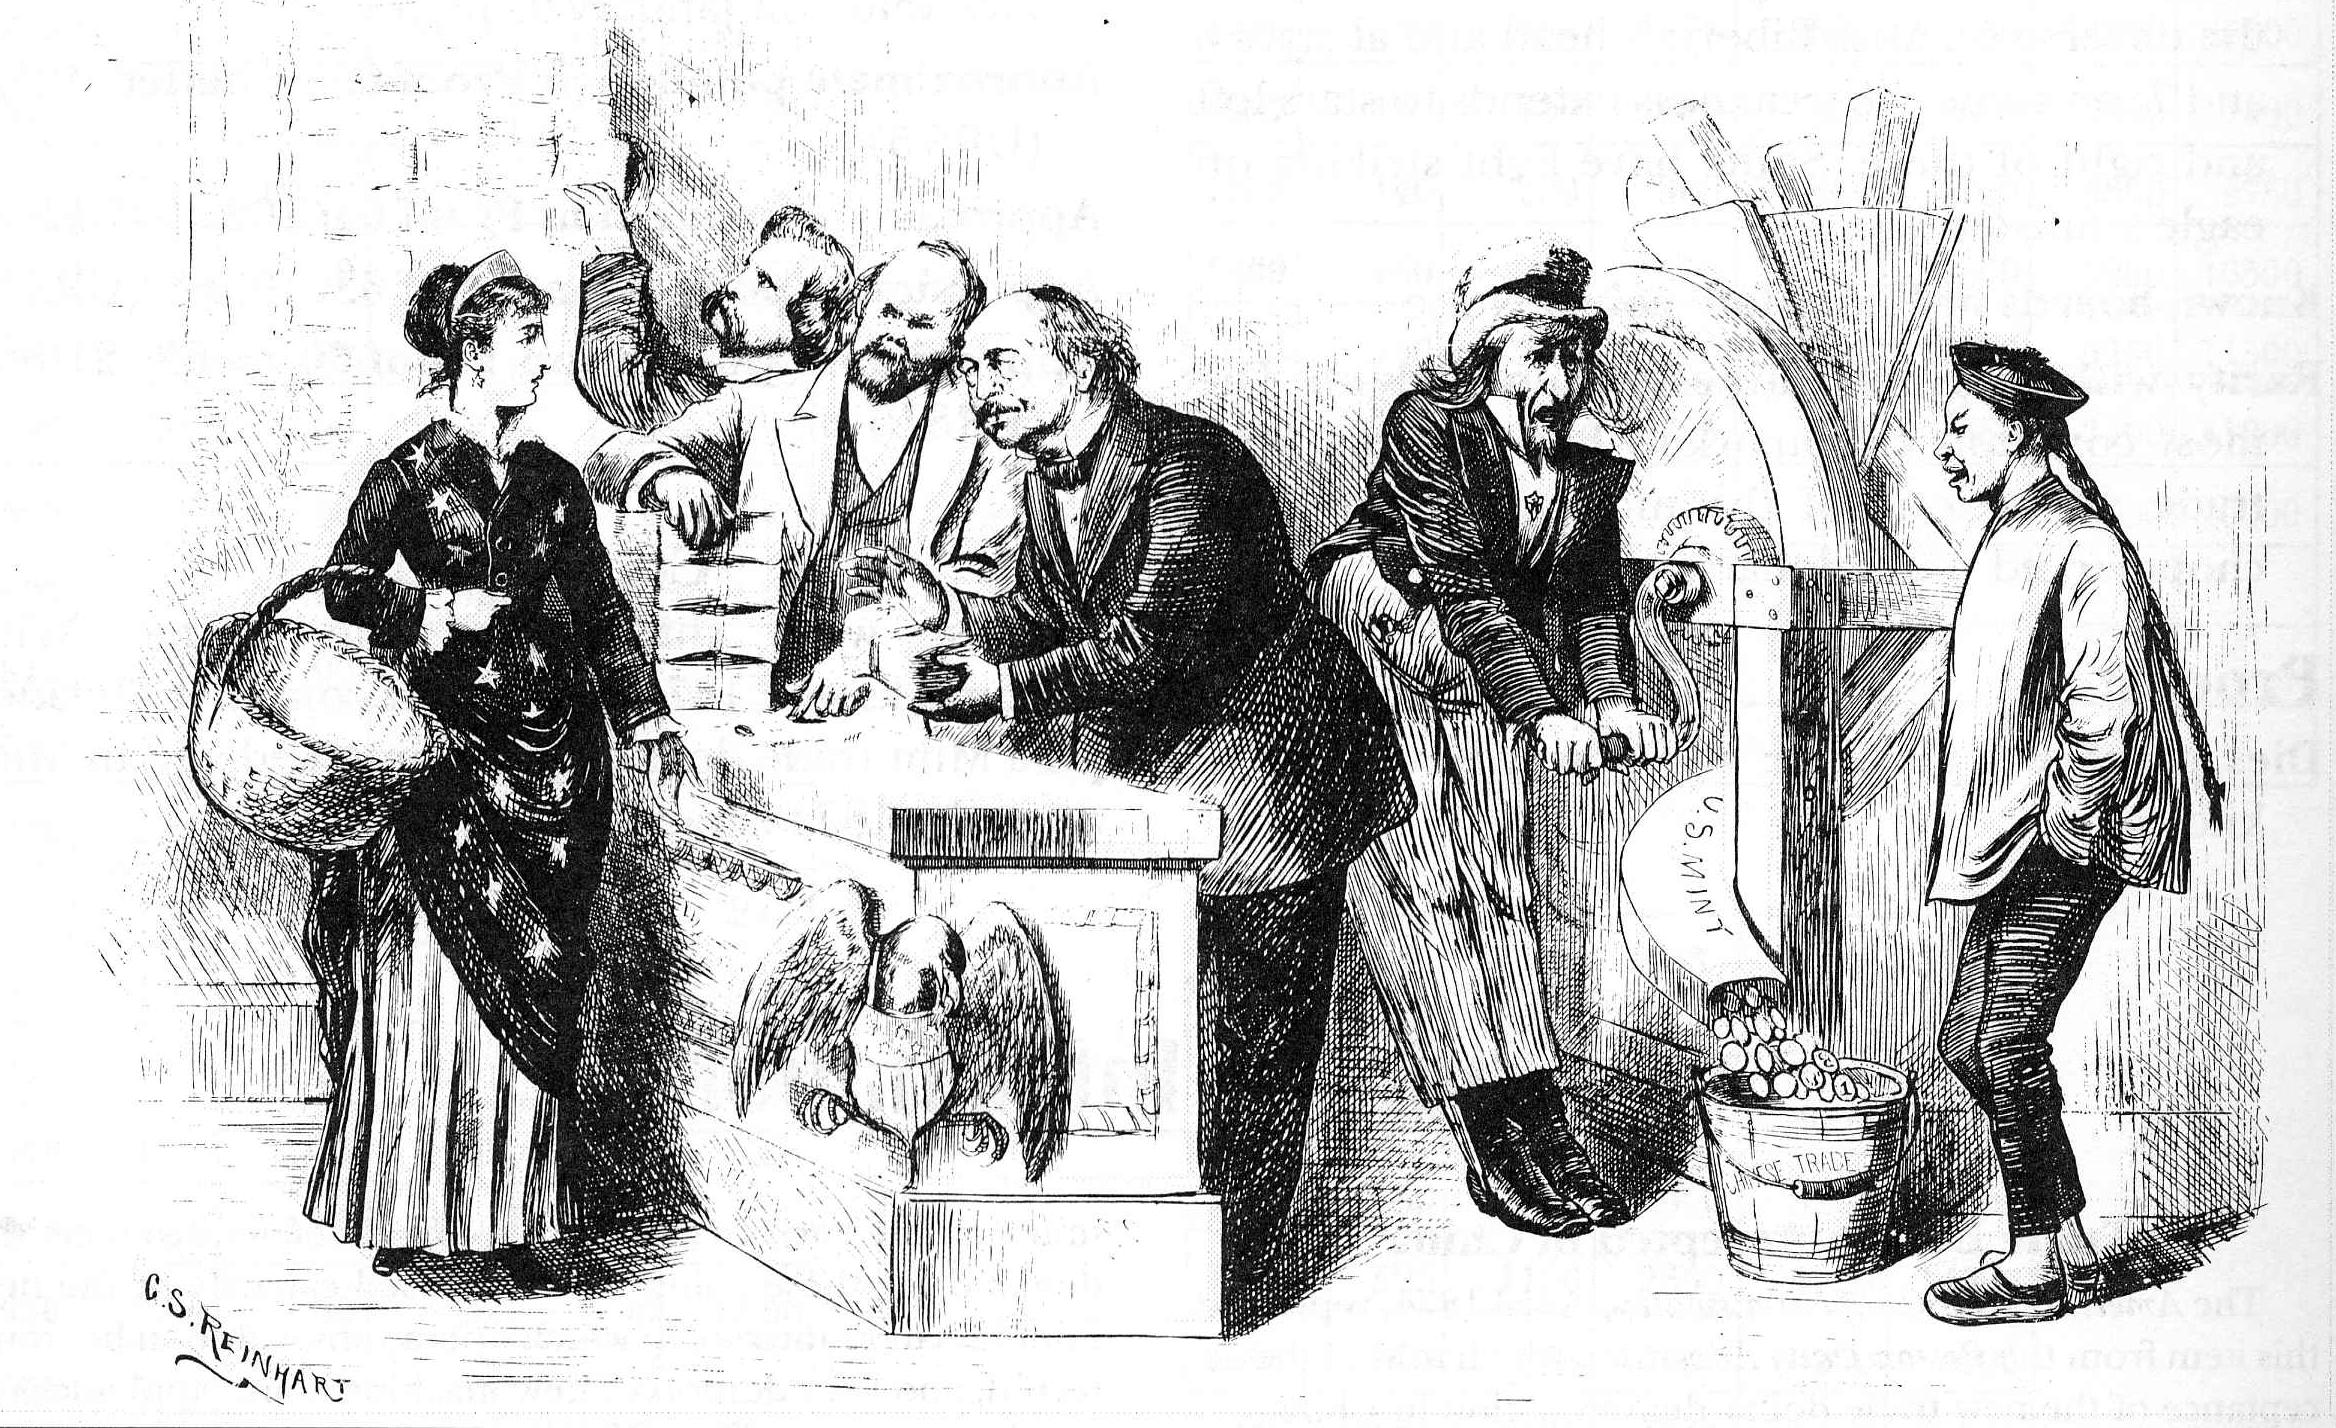 A political cartoon from Harper’s Weekly.